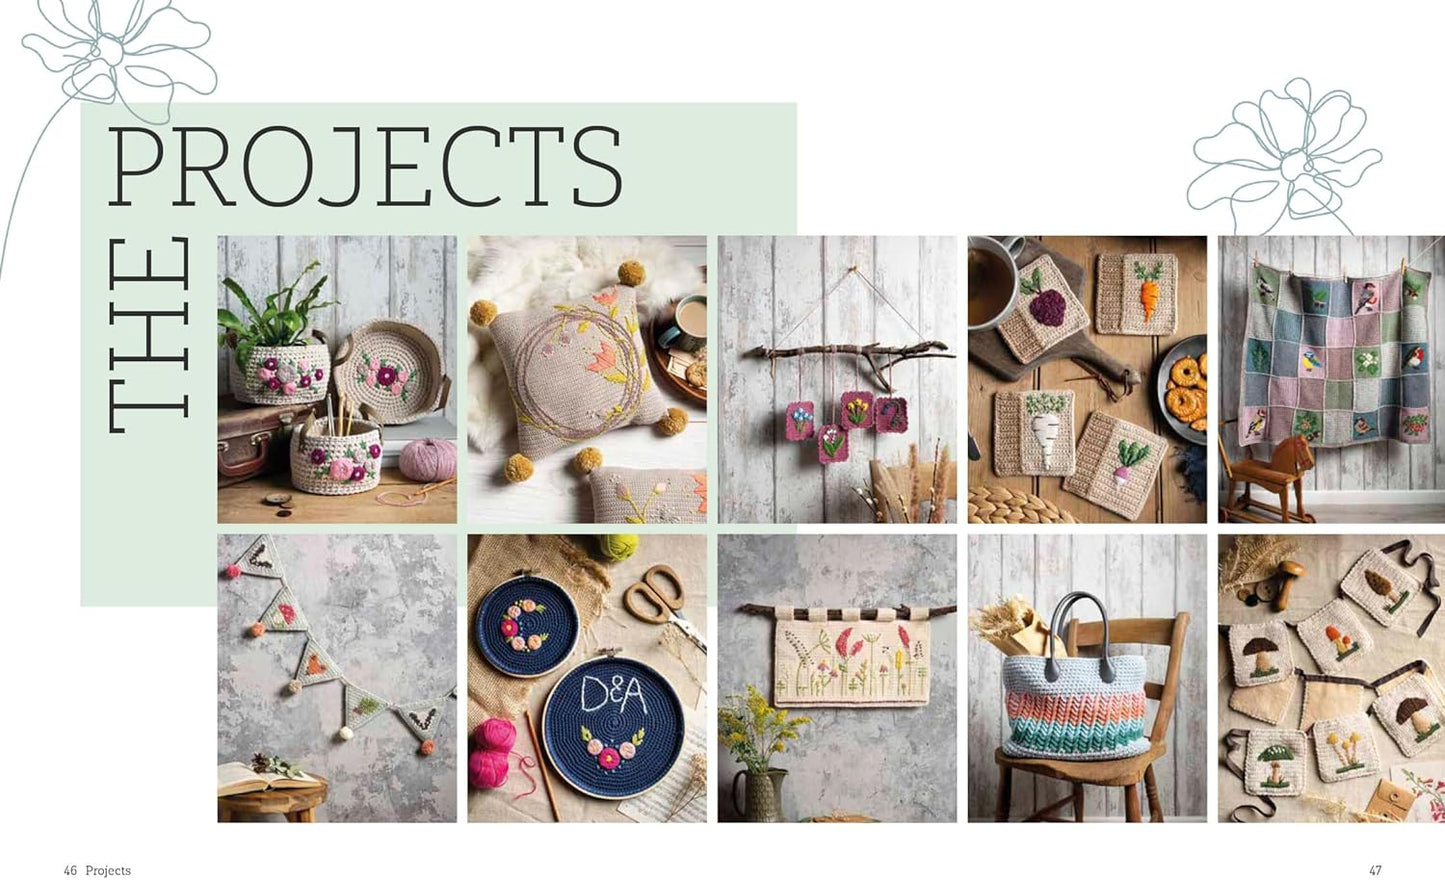 Embroidered Crochet: Enchanting projects to crochet and embroider